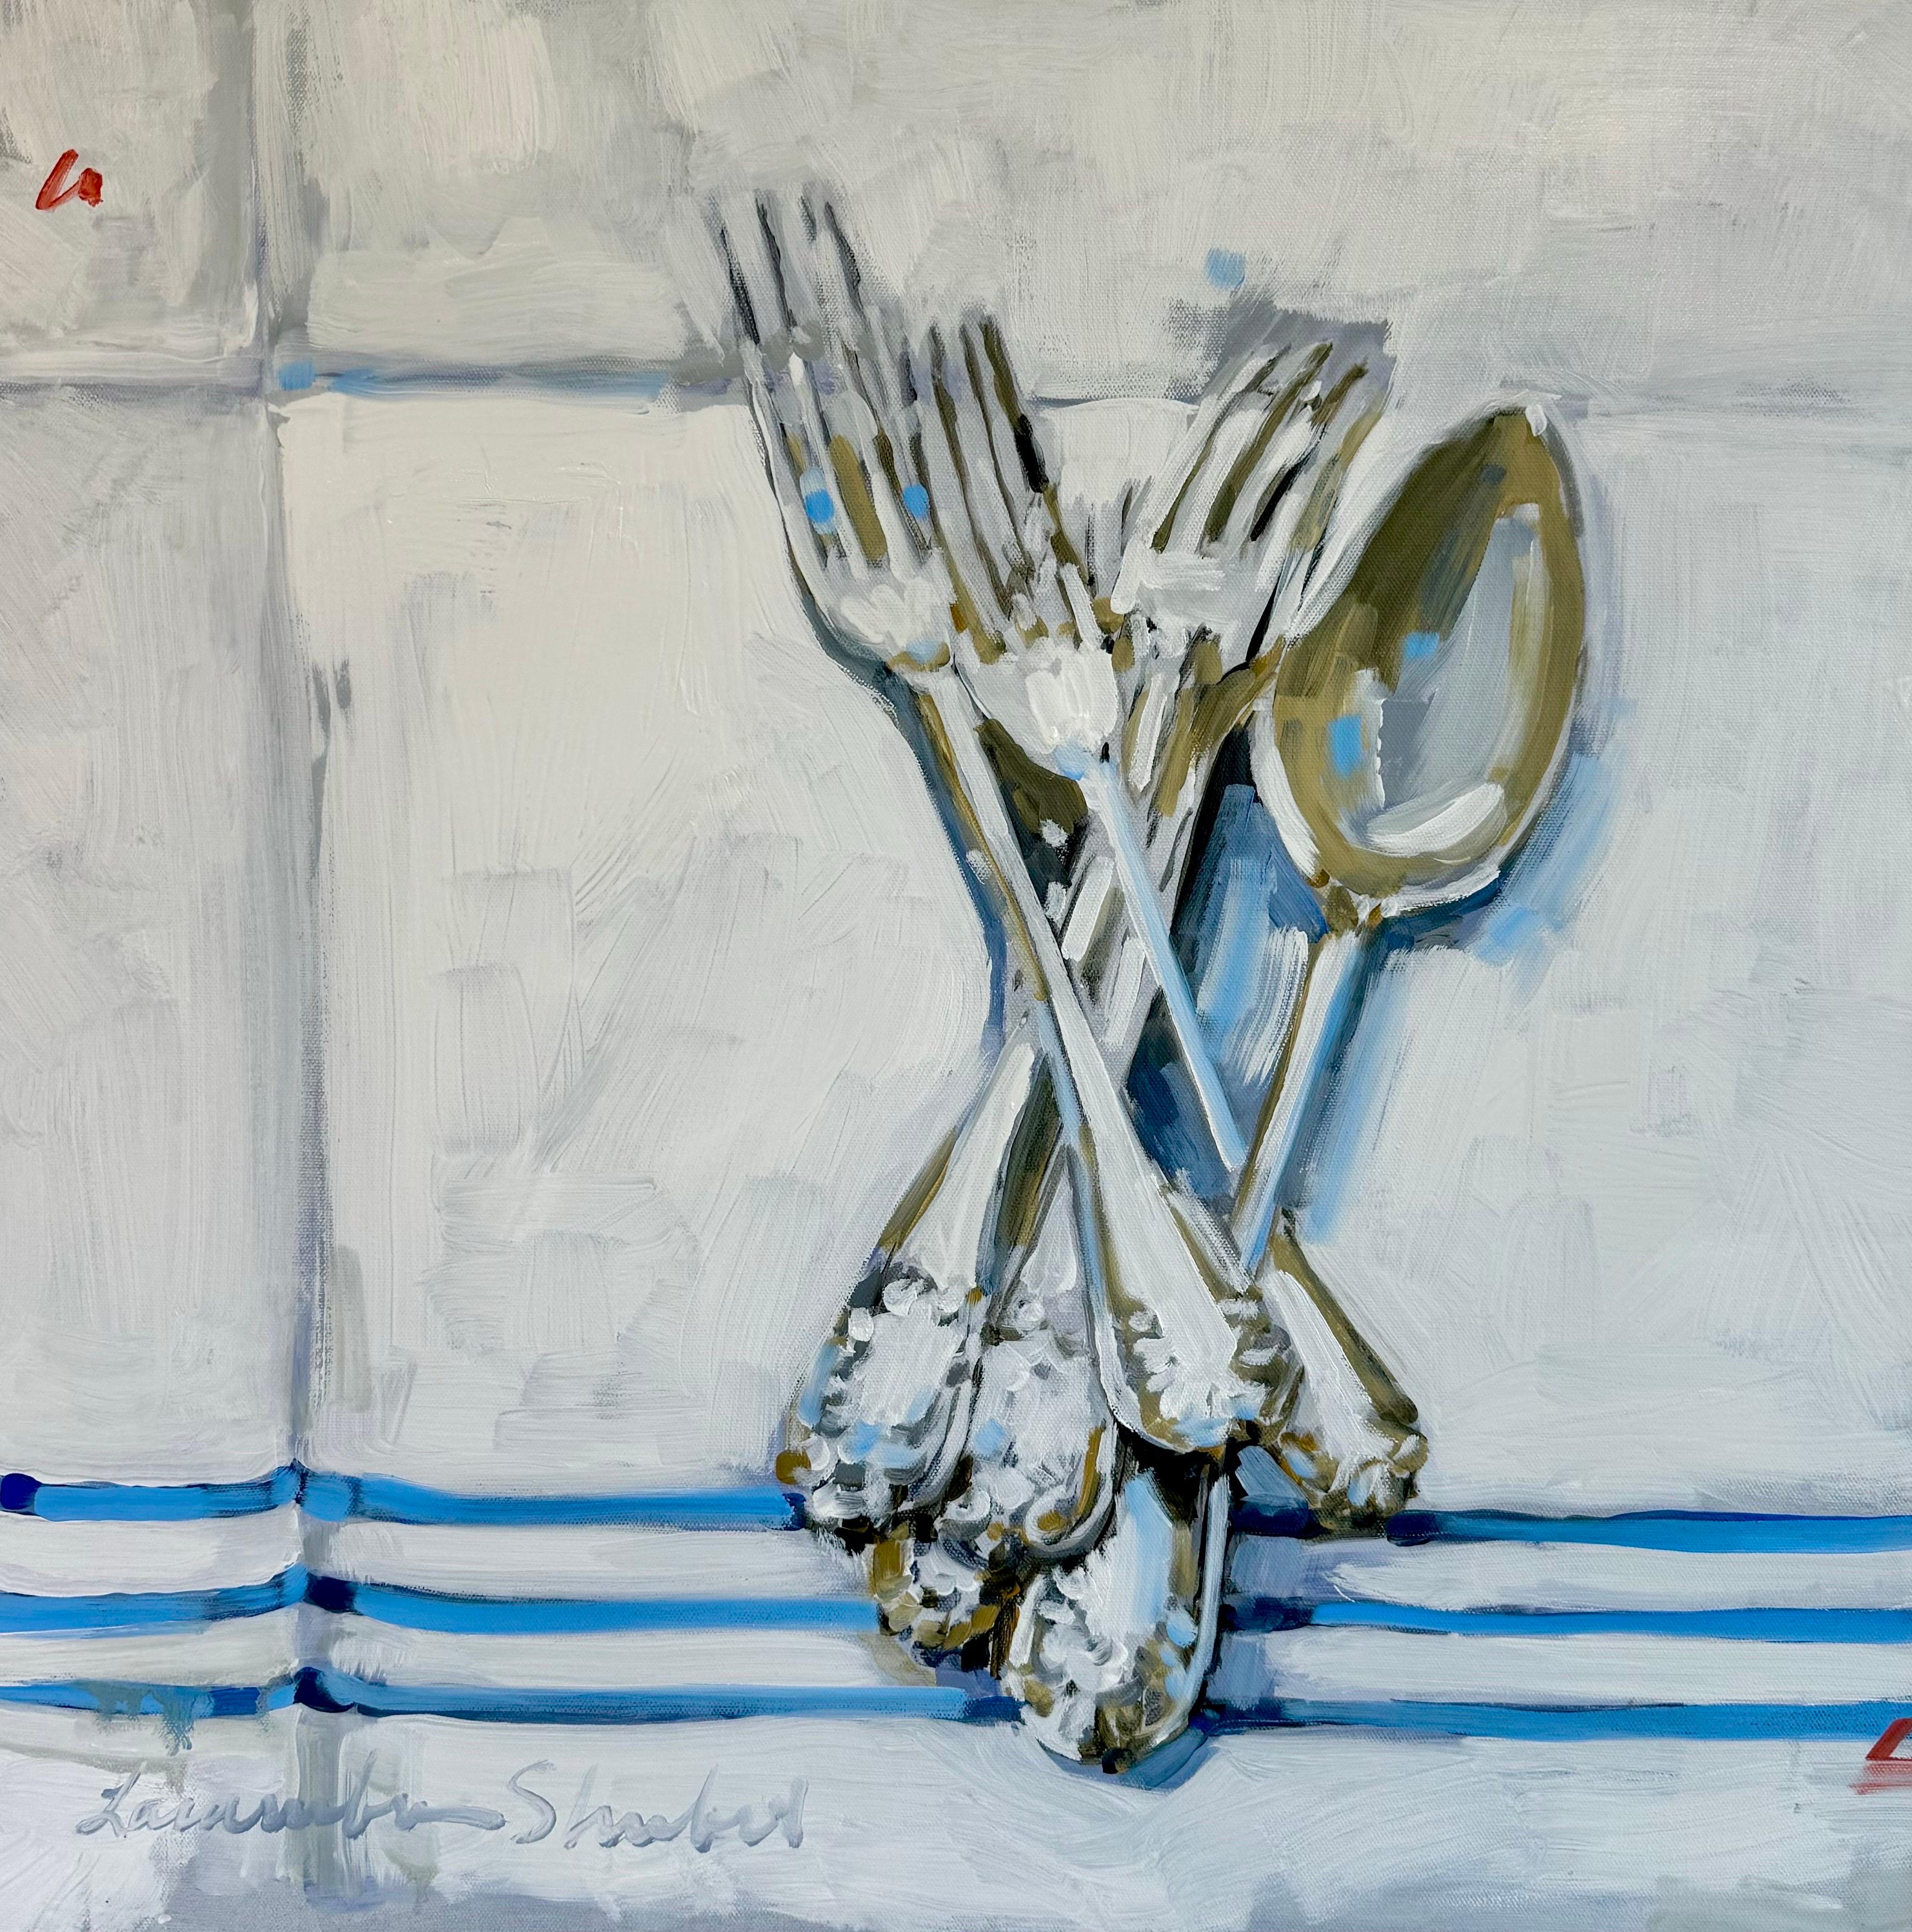 With a nod to Shakespeare, we can readily count the ways we love Laura Shubert’s light-and energy-filled paintings. We admire her deft way of capturing luminosity as it plays off her subjects. We smile at her choice of subject: waiters, caught